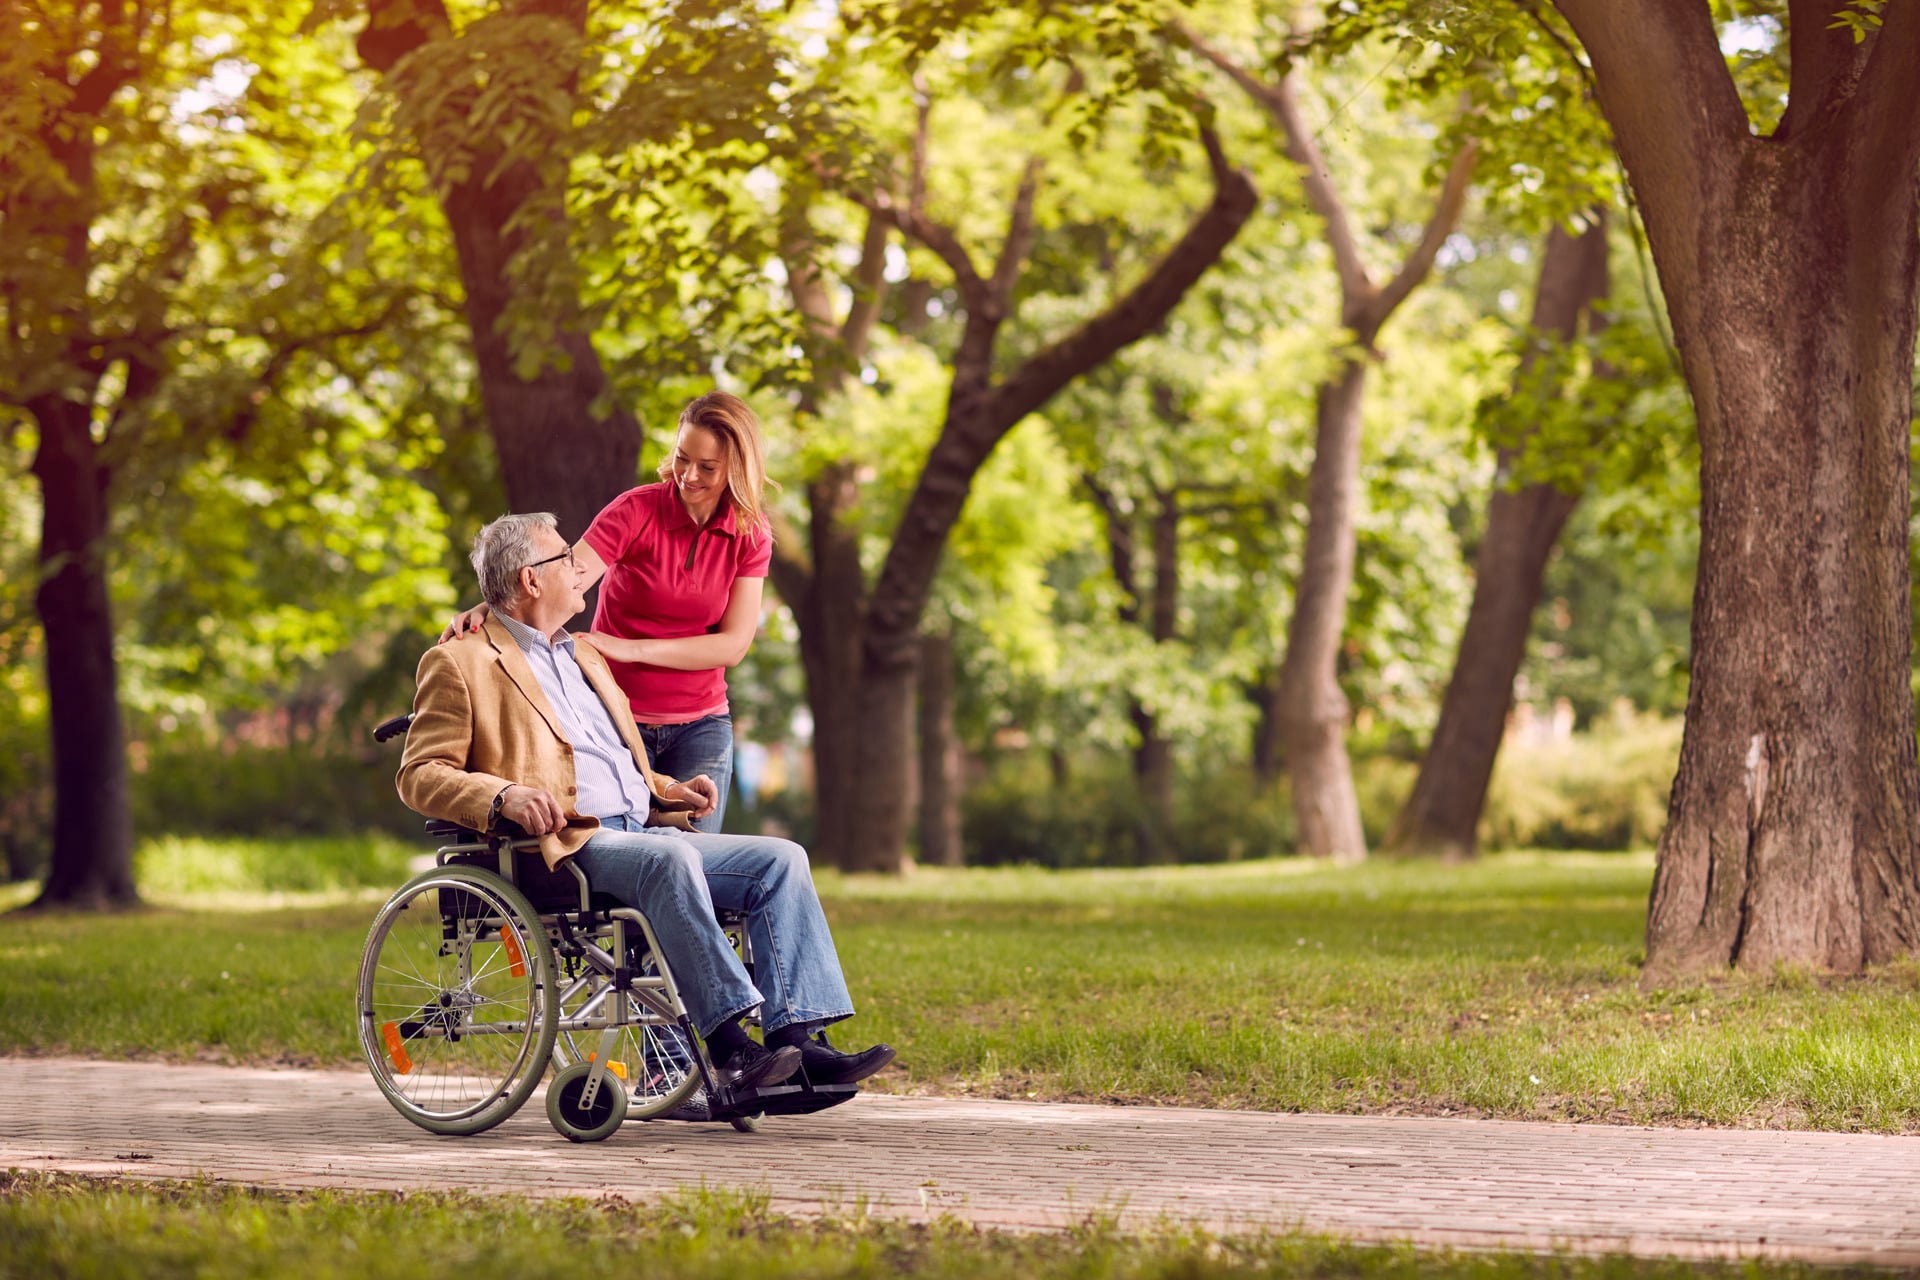 Image of a lady looking at an elderly person sitting in a wheelchair in the park.